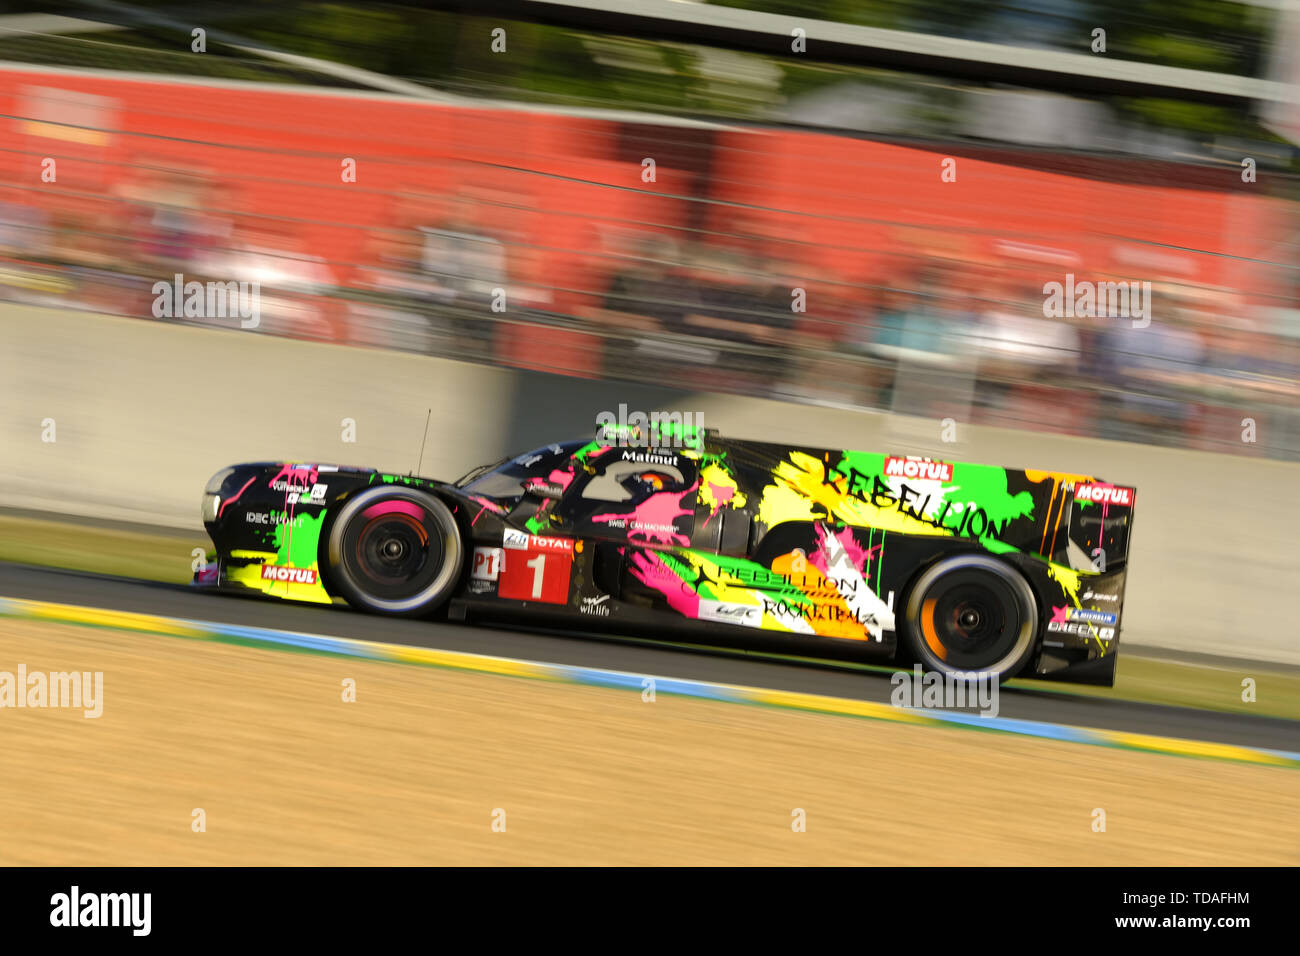 Le Mans, Sarthe, France. 13th June, 2019. Rebellion Racing R13 Gibson rider ANDRE LOTTERER (GER) in action during the 87th edition of the 24 hours of Le Mans the last round of the FIA World Endurance Championship at the Sarthe circuit at Le Mans - France Credit: Pierre Stevenin/ZUMA Wire/Alamy Live News Stock Photo